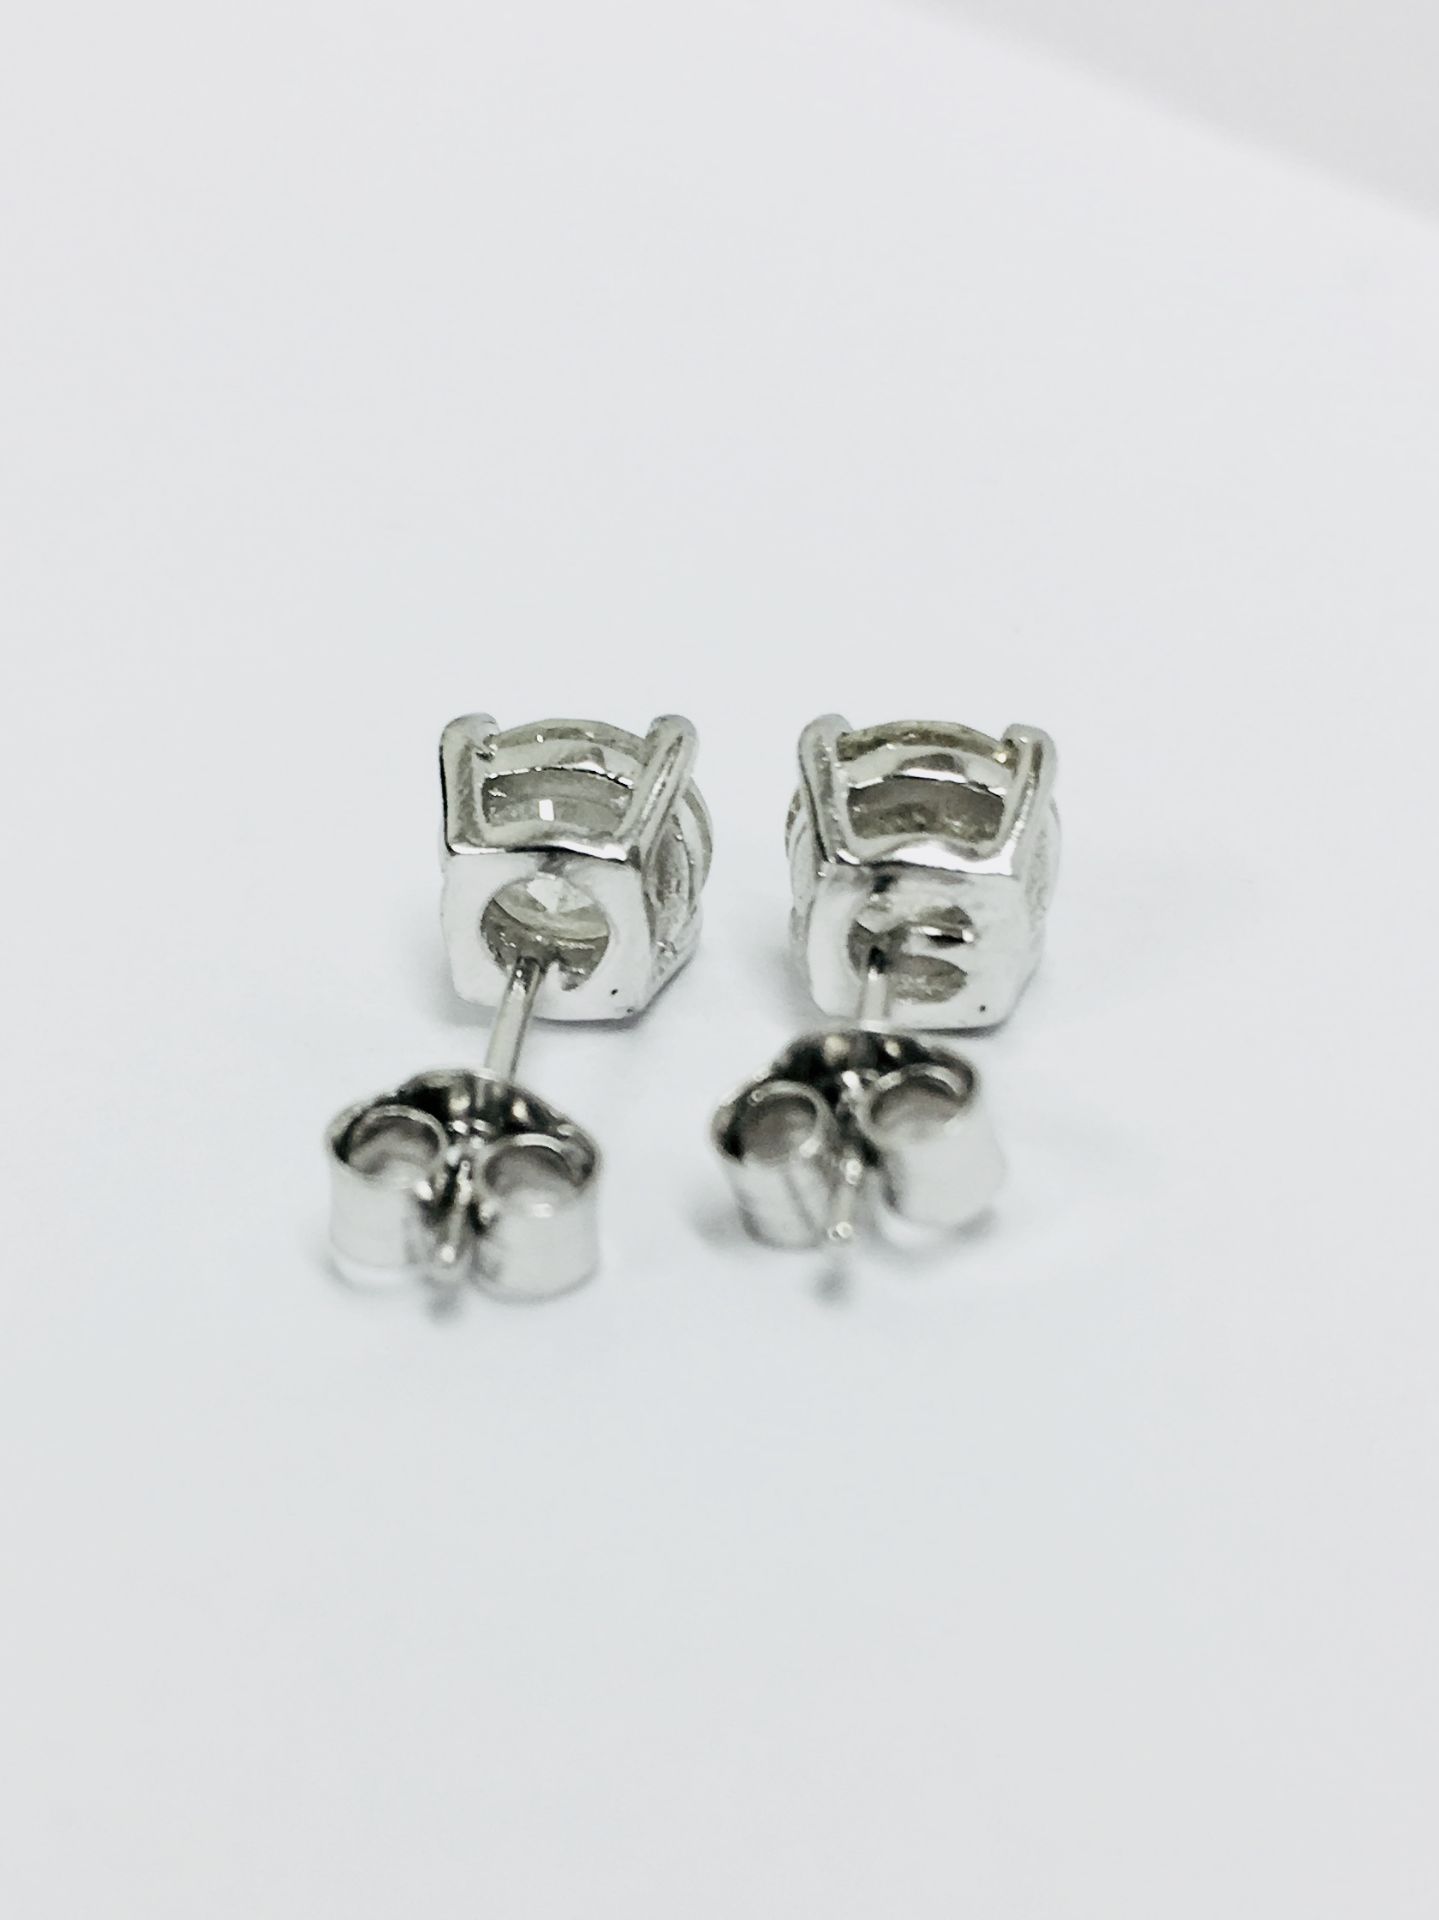 2.00Ct Solitaire Diamond Stud Earrings Set With Brilliant Cut Diamonds Which Have Been Enhanced. - Image 18 of 19